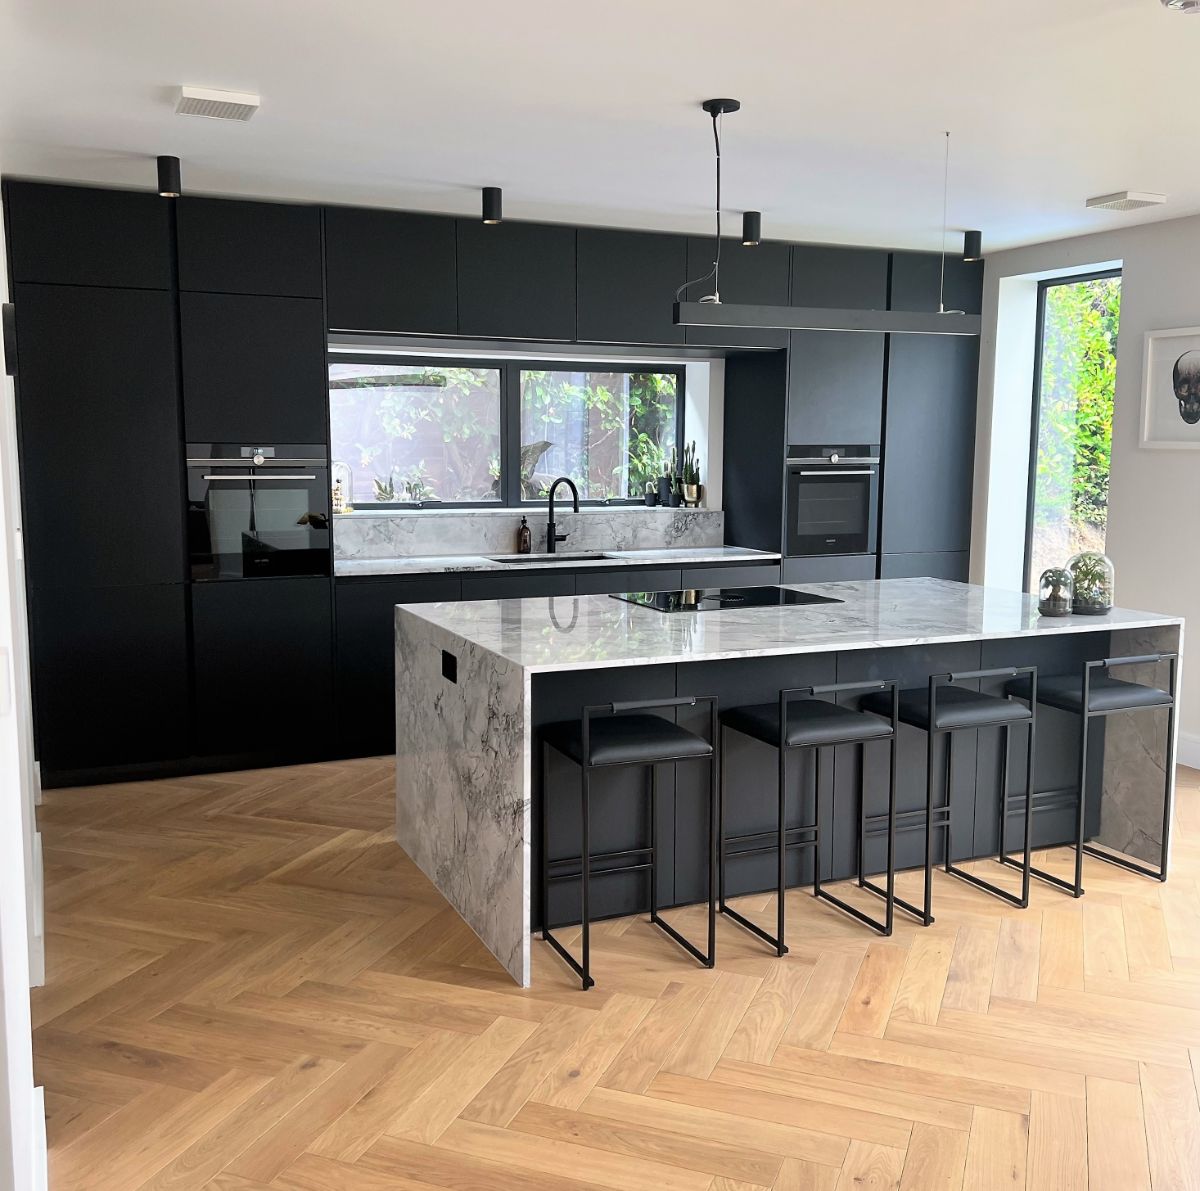 Explore Amanda and Richard's Buckinghamshire kitchen transformation. Witness the perfect fusion of style and functionality.